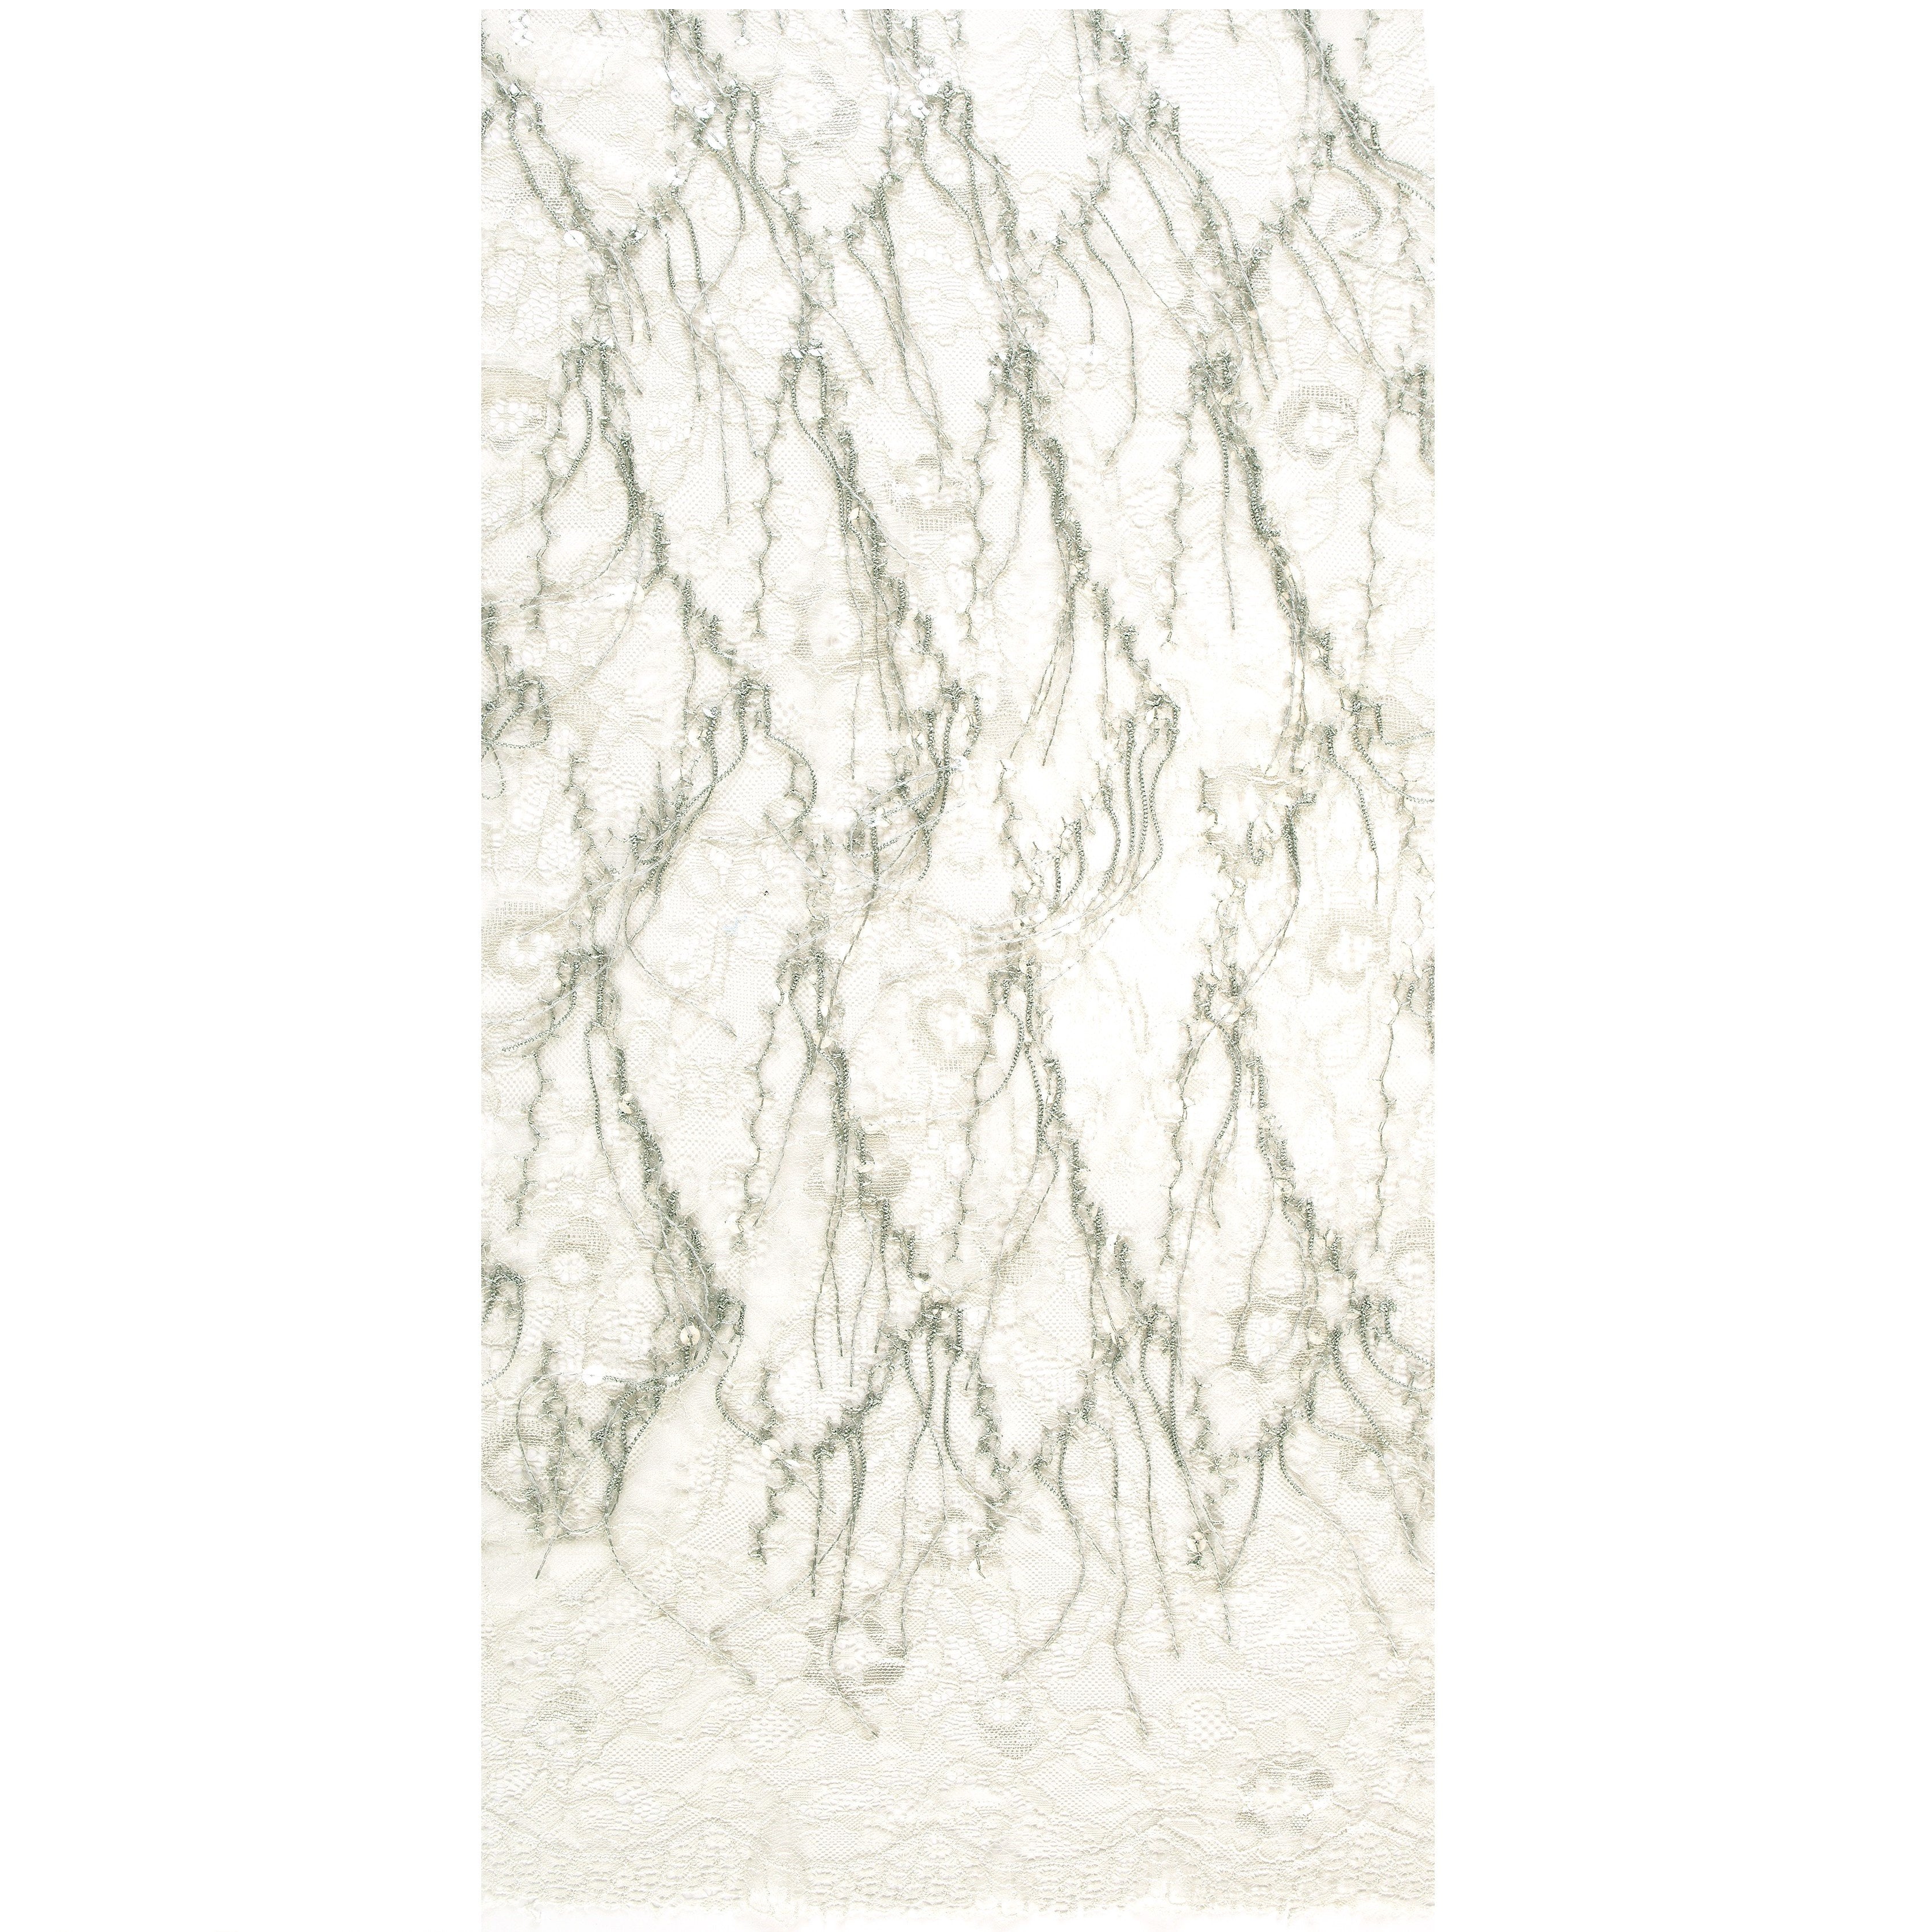 3D Fringed Wavy Sequin Embroidery Lace Fabric | Burç Fabric